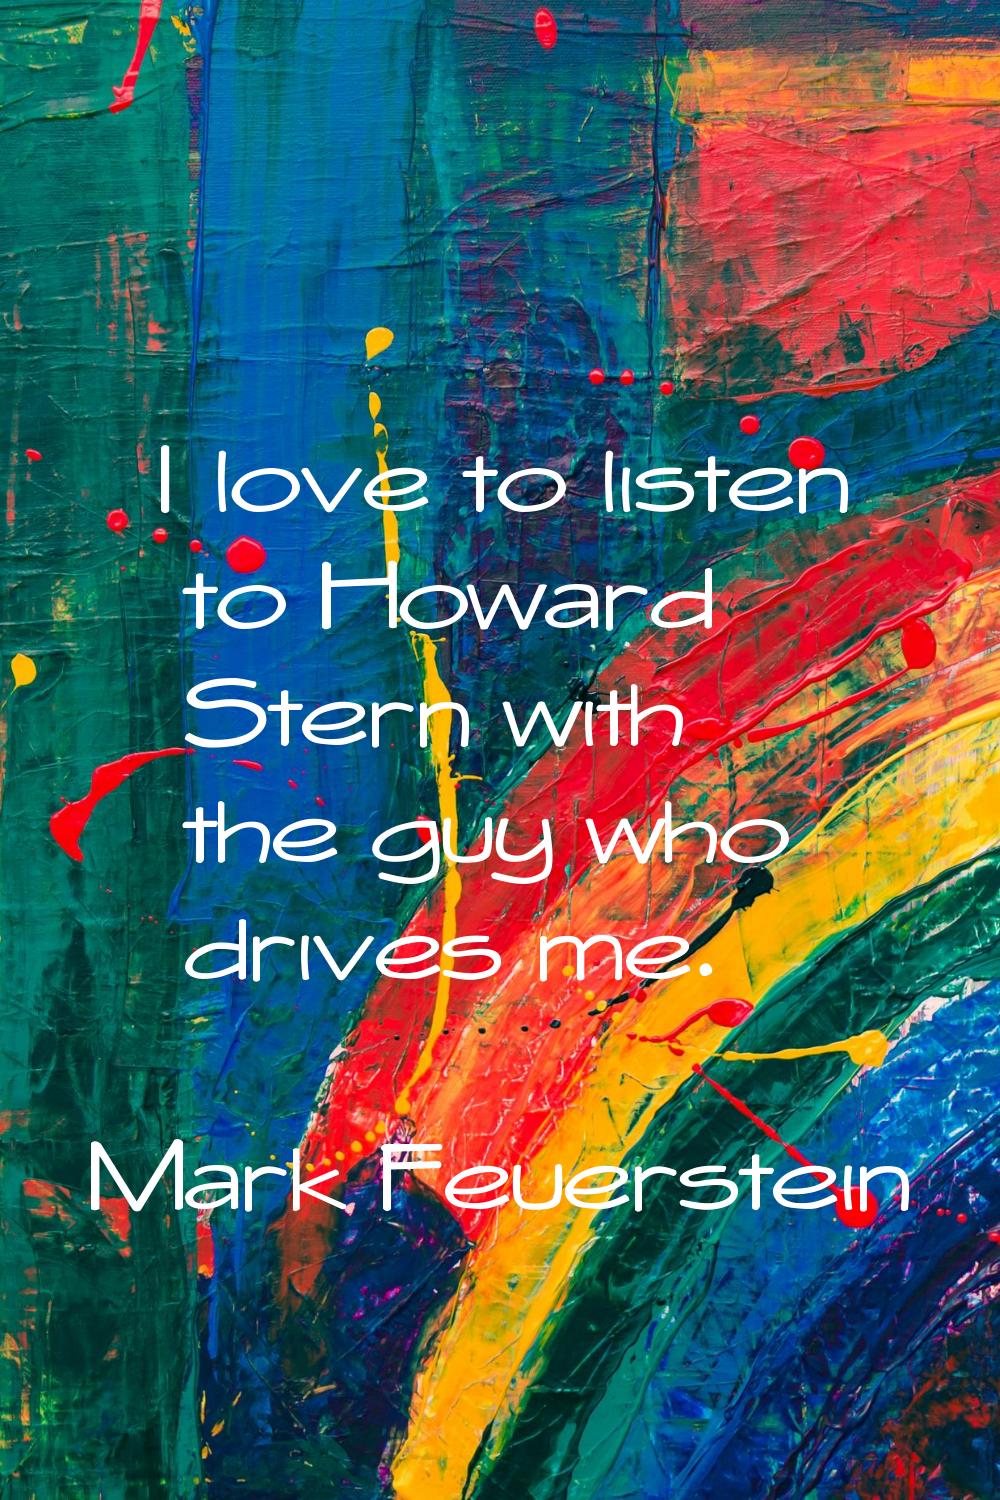 I love to listen to Howard Stern with the guy who drives me.